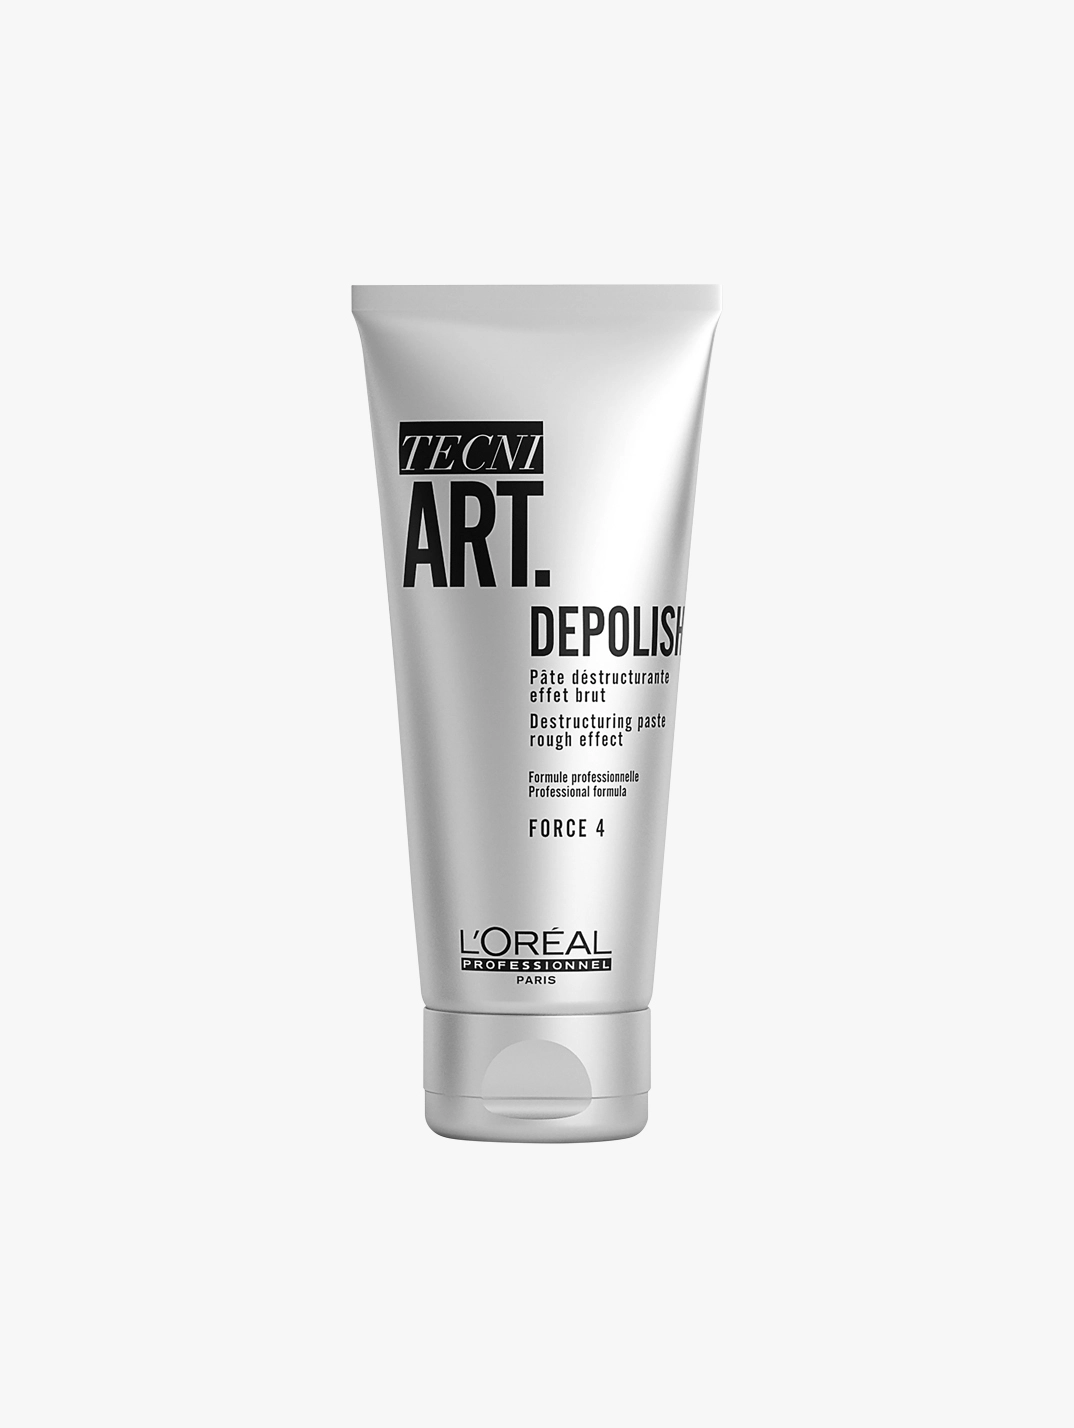 APPLICATION : How To Apply L'oreal Tecni Art